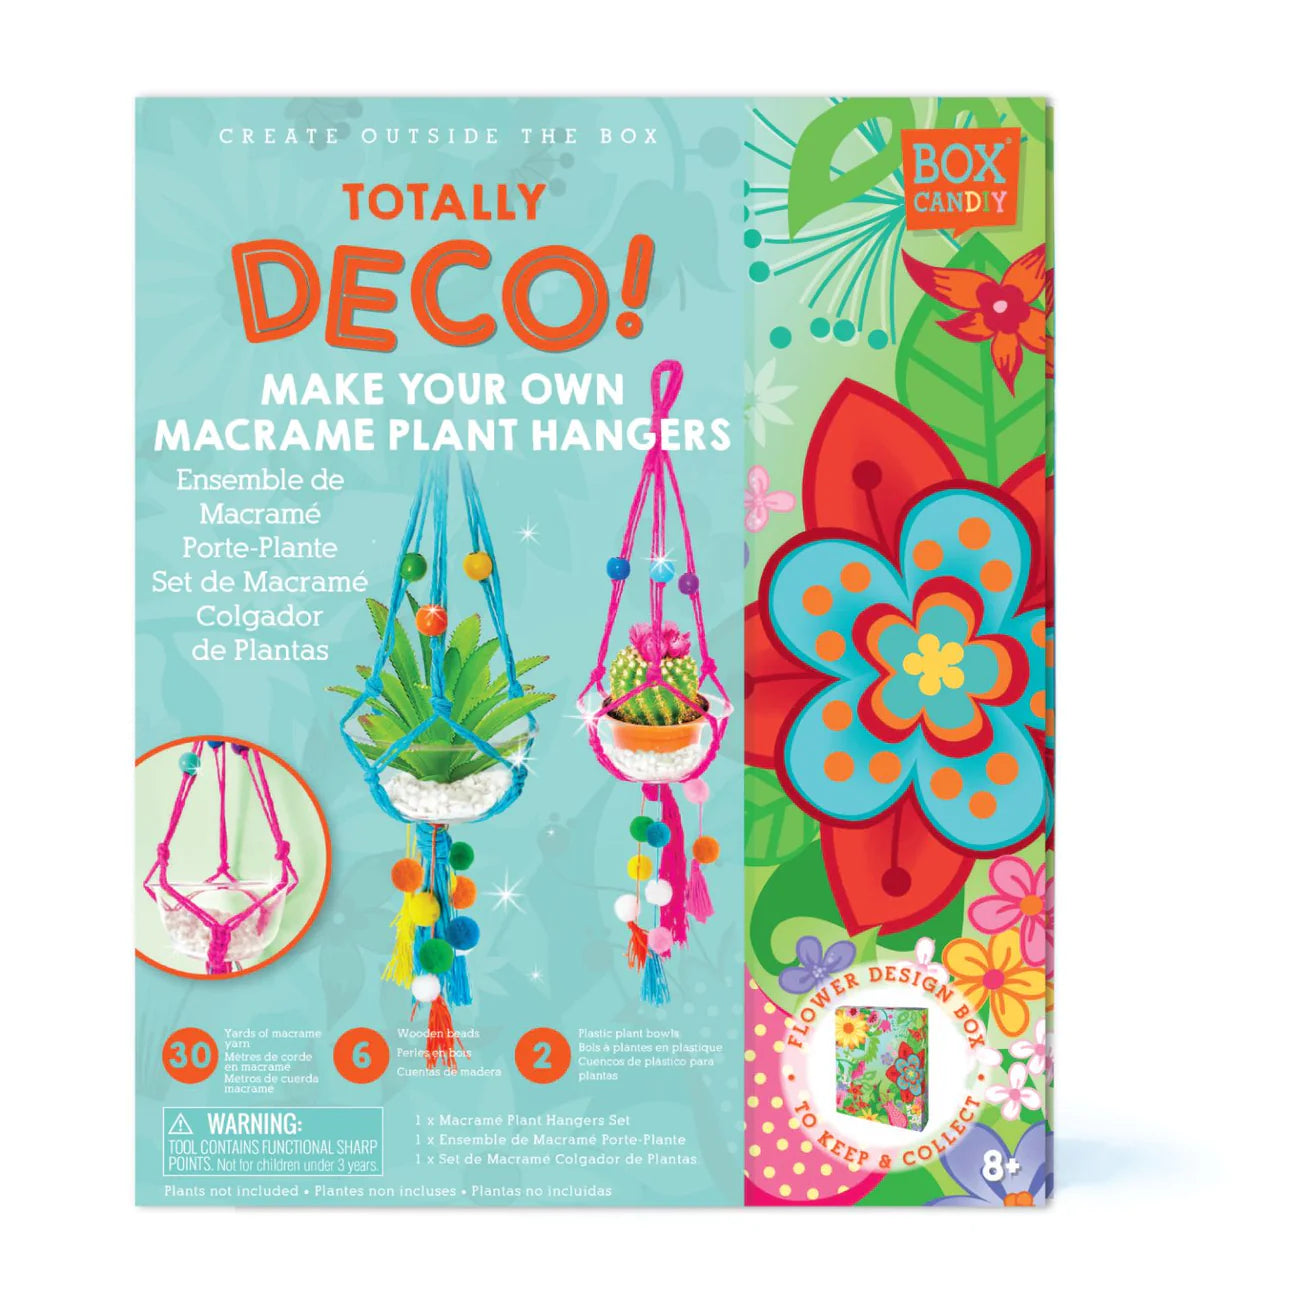 Deco! Make Your Own Macrame Plant Hanger by Box Candiy #BC-HGRFL